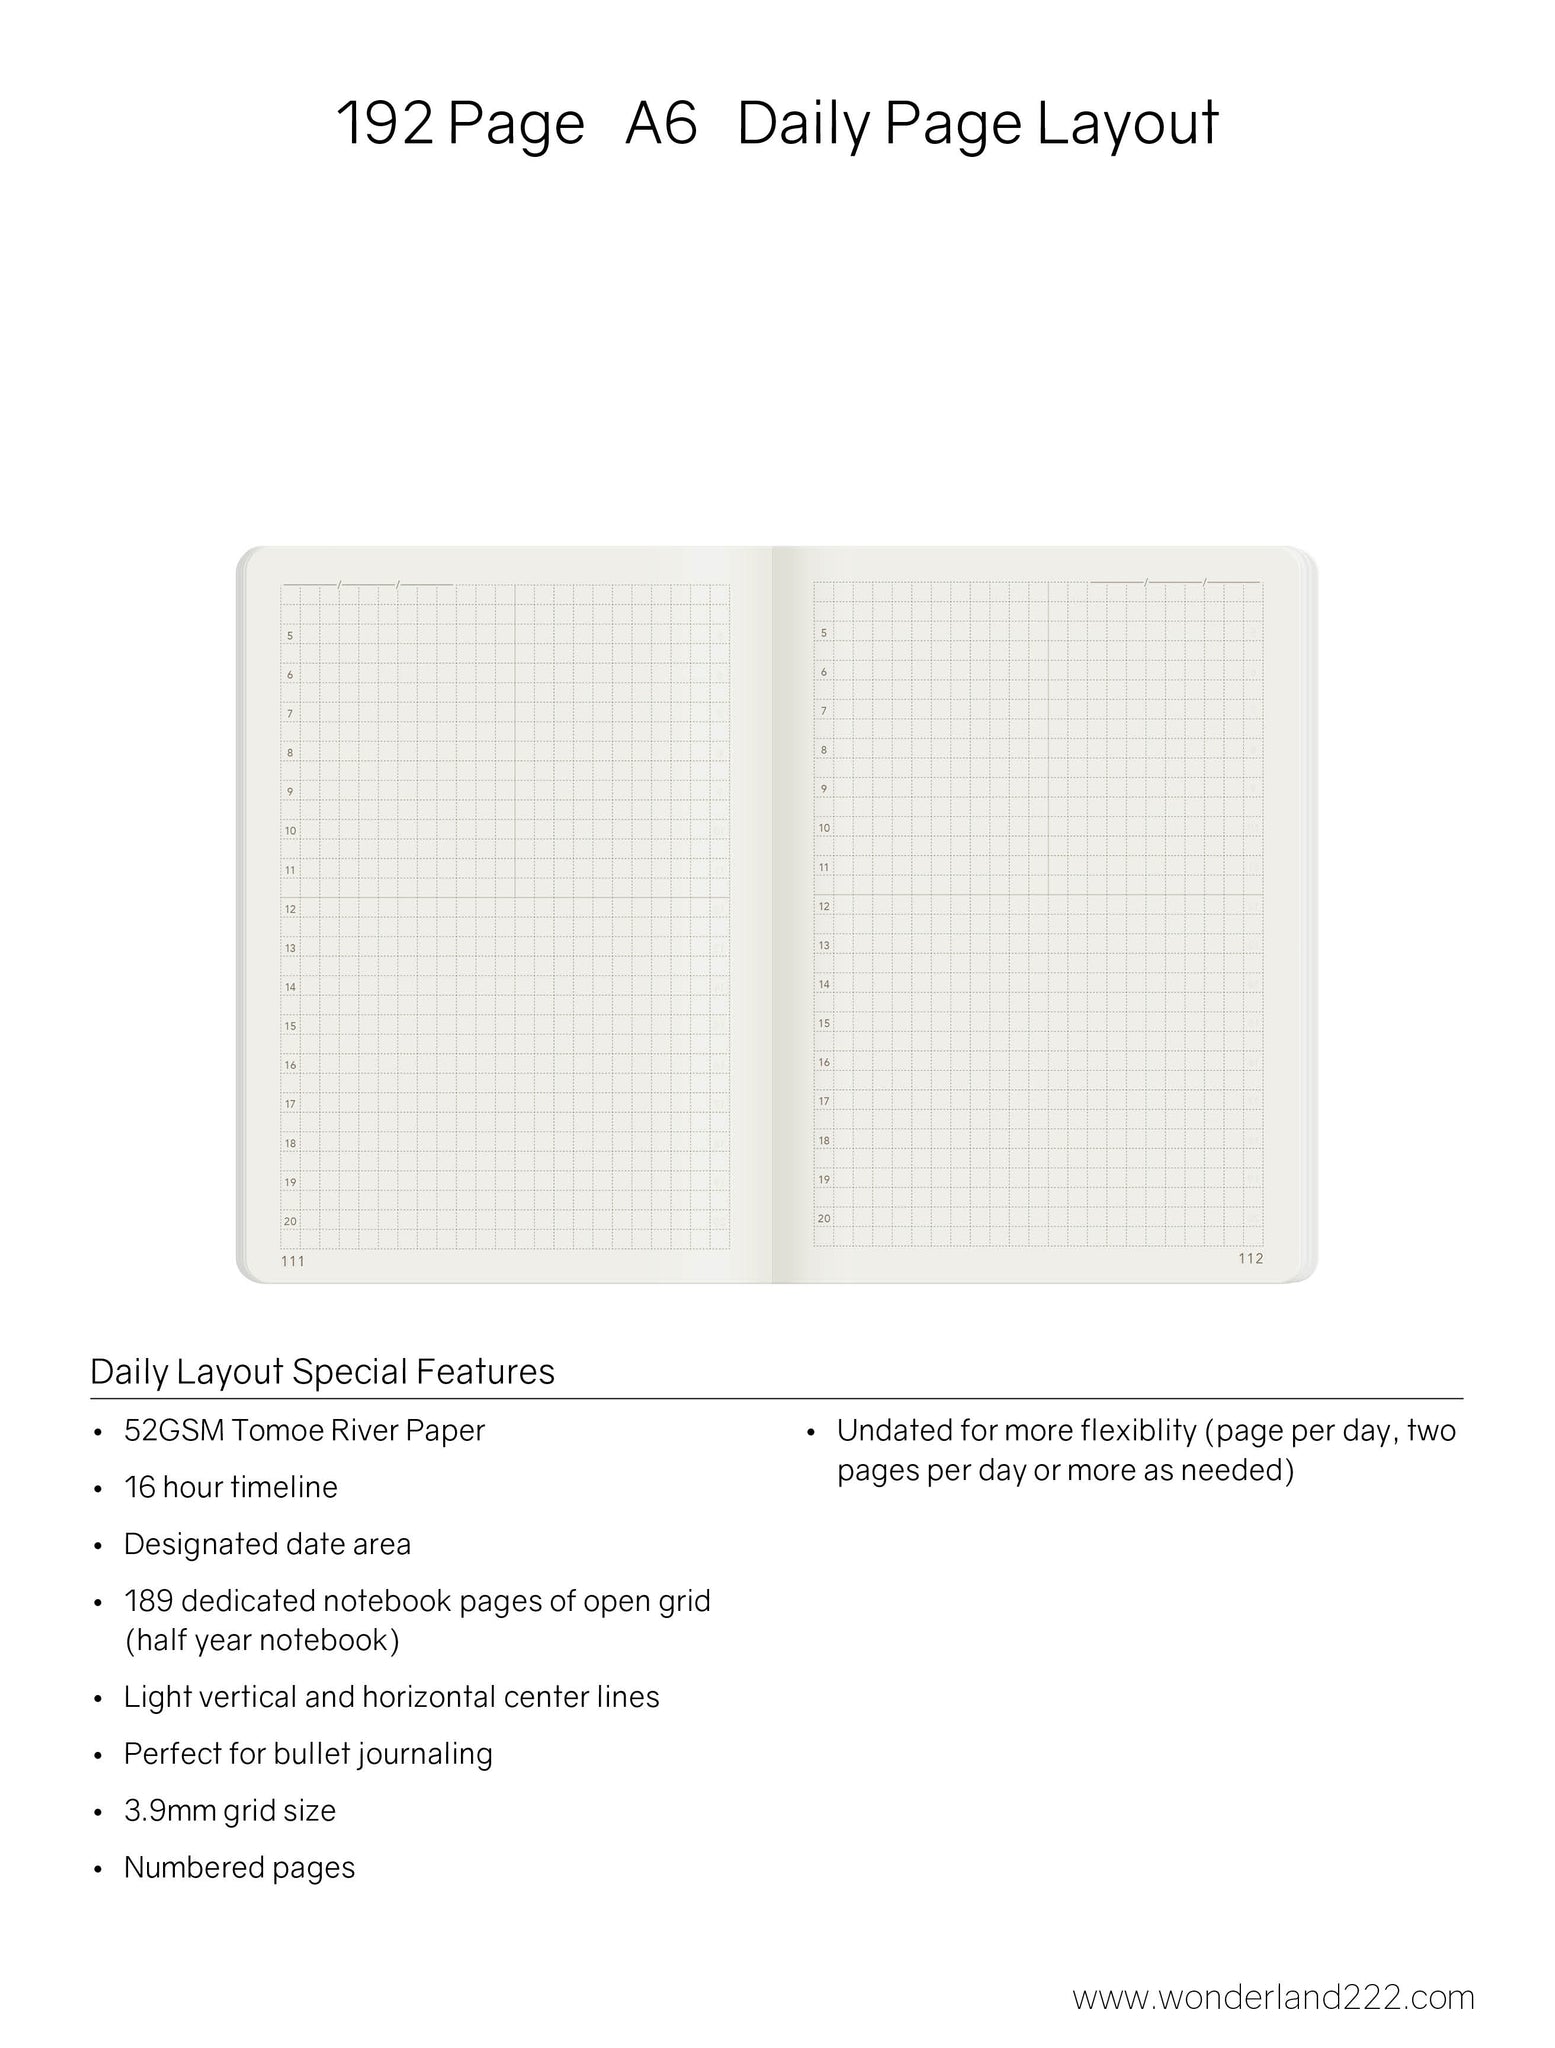 A6 Notebook (192 pages)